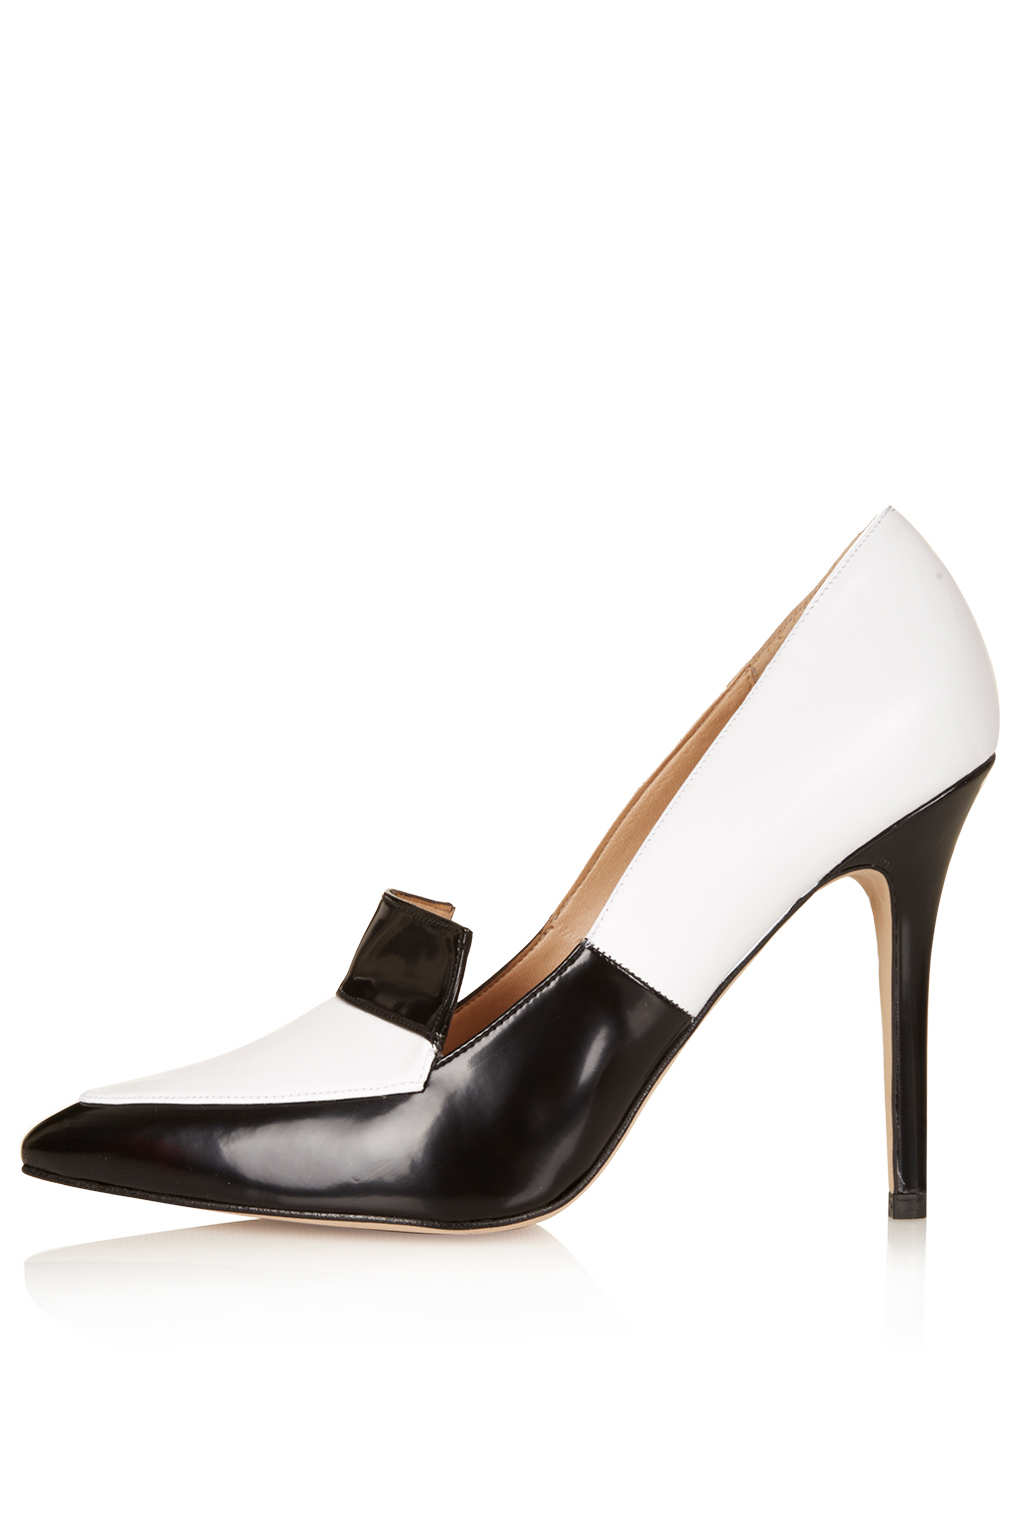 Lyst - Topshop Gesture Panelled Hi Court Shoes in White